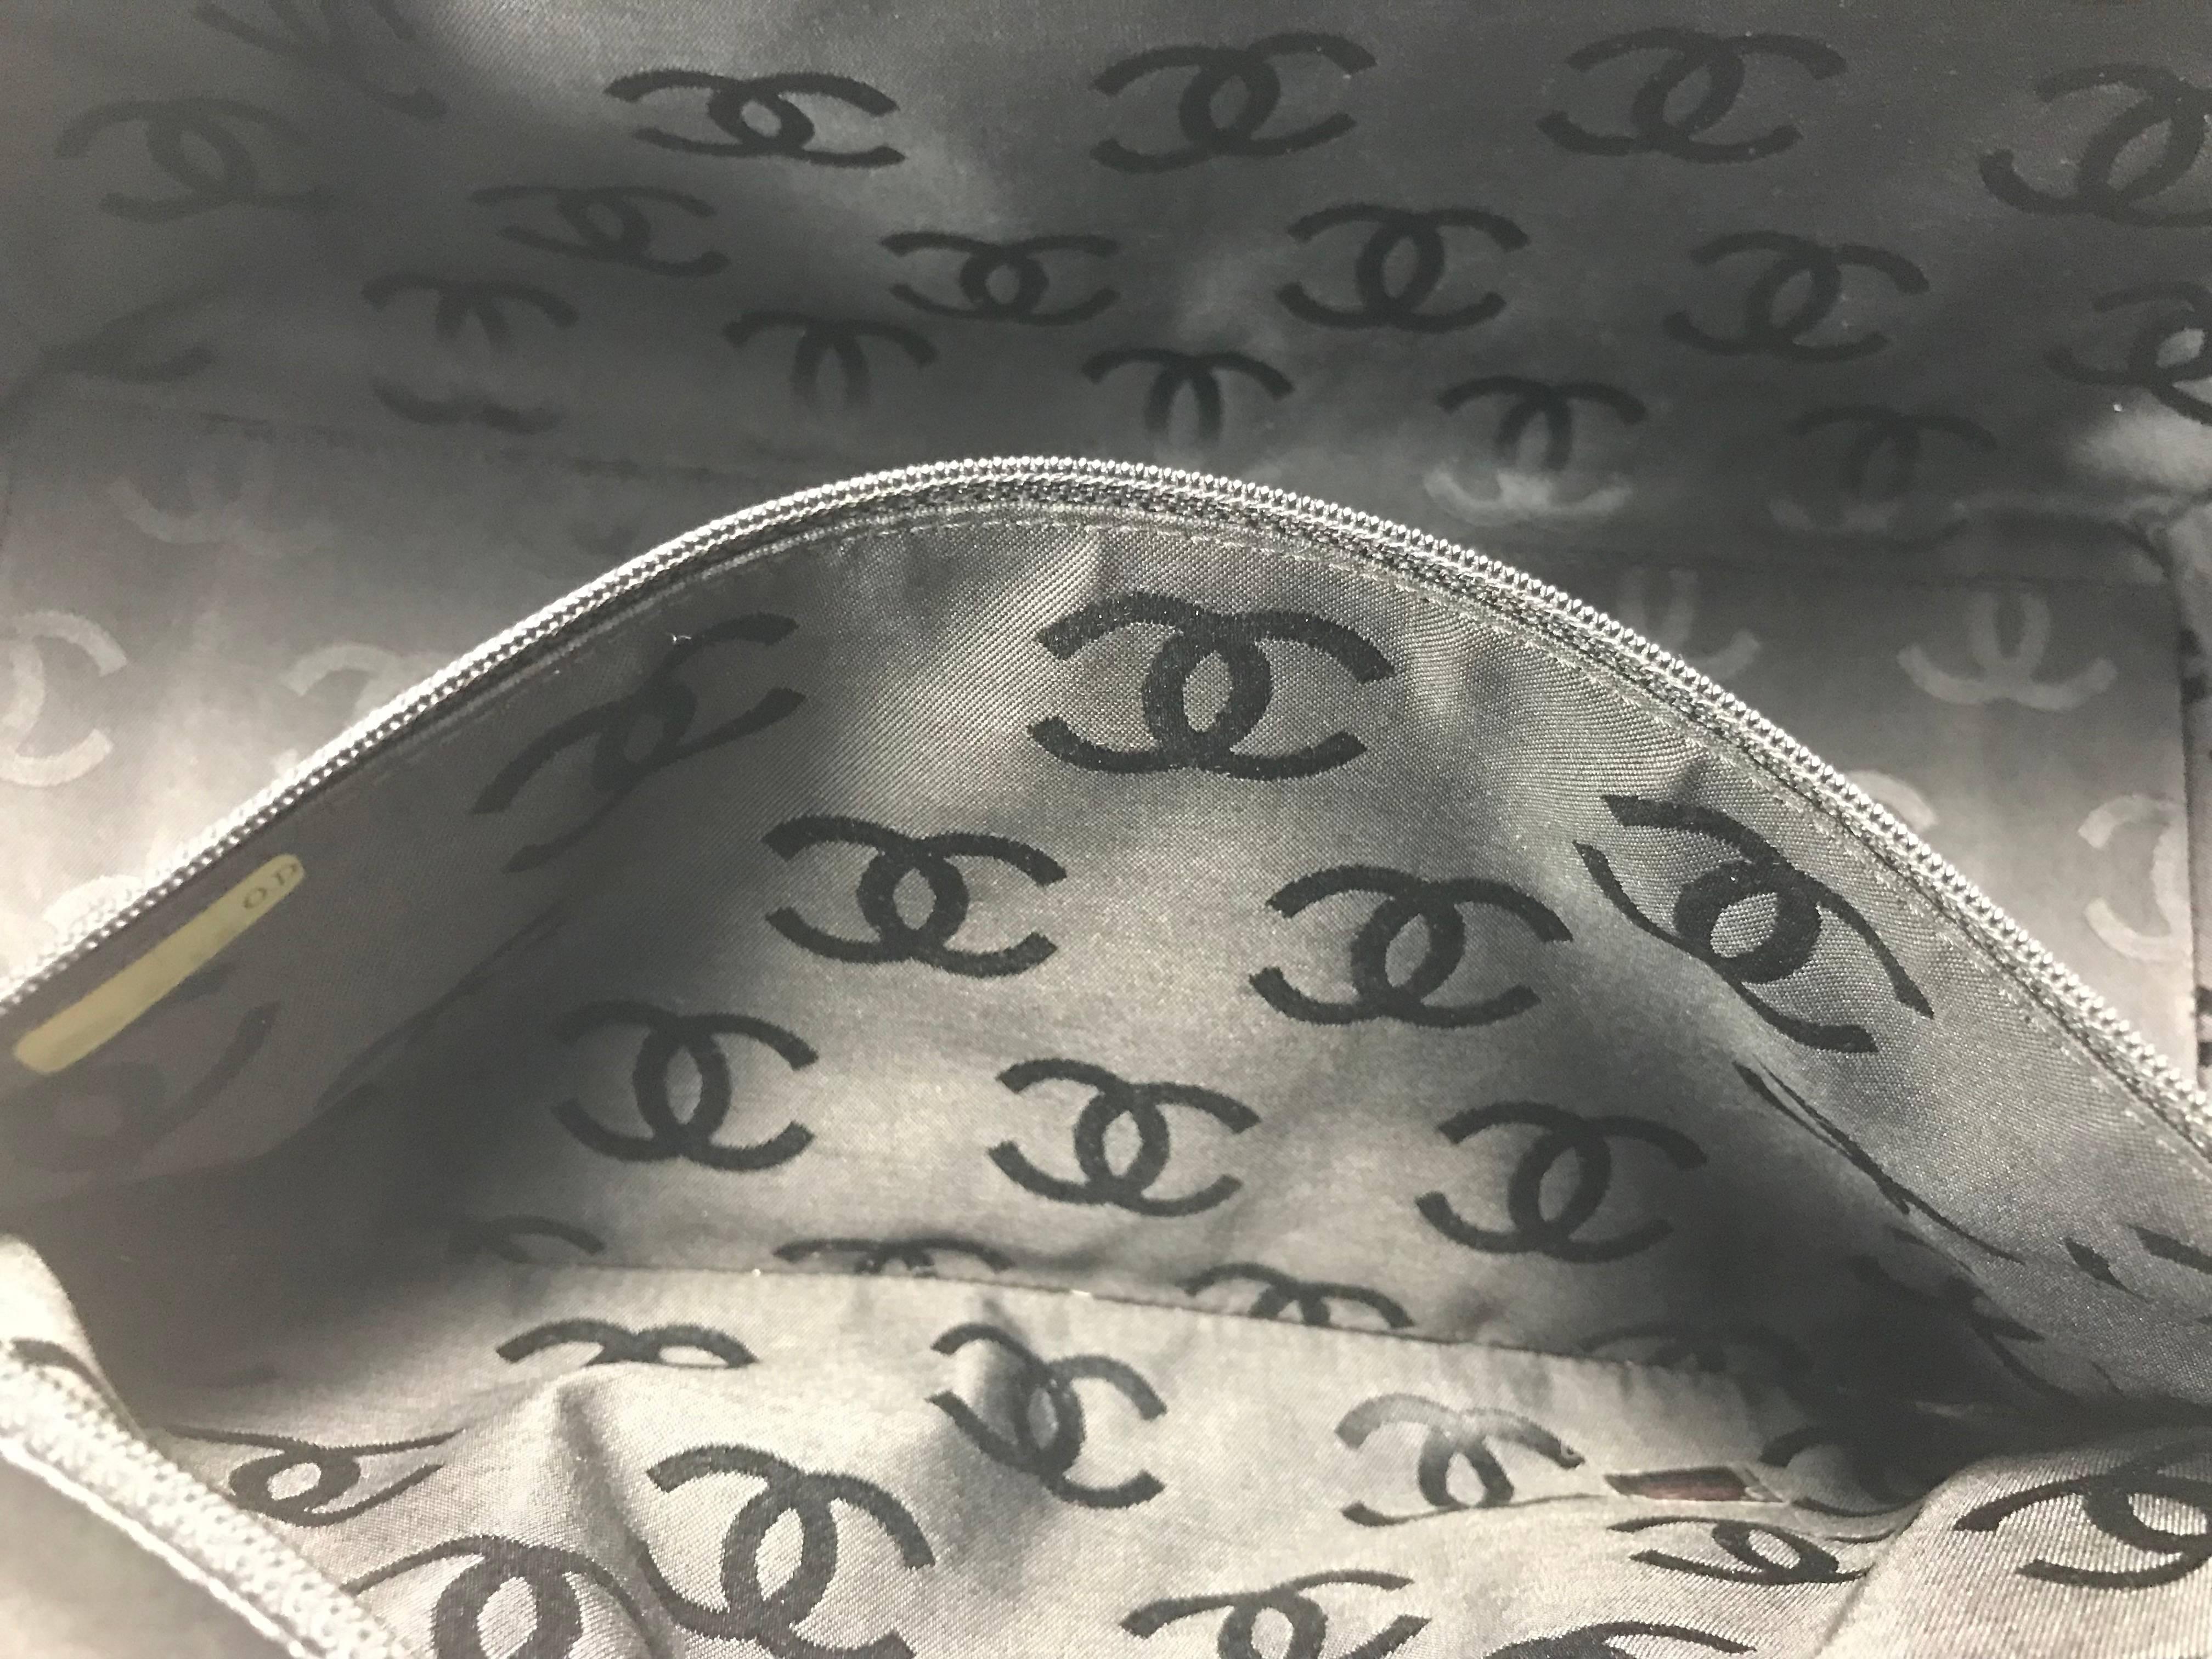 Chanel Quilted Leather Wild Stitch Tote in Black Tote Bag 4